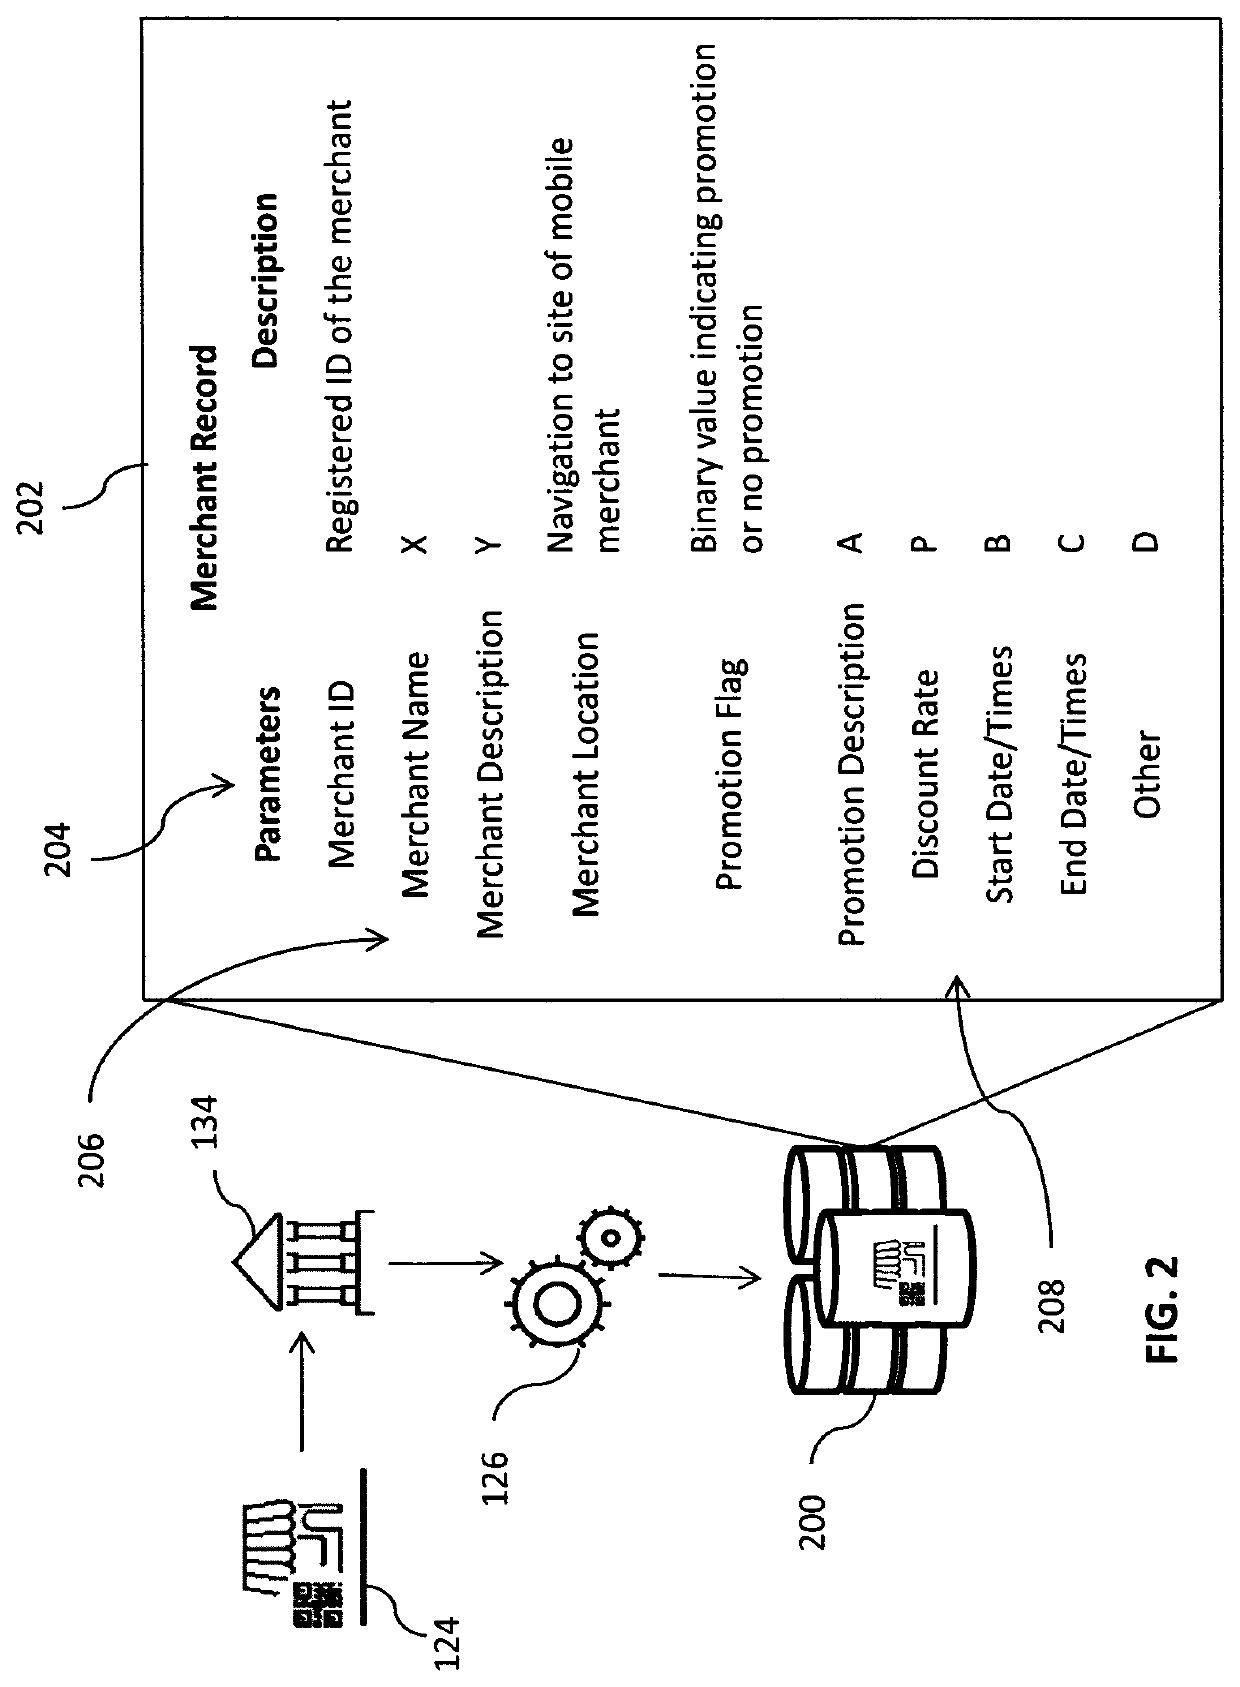 Payment processing system for applying merchant promotions to a push payment transaction